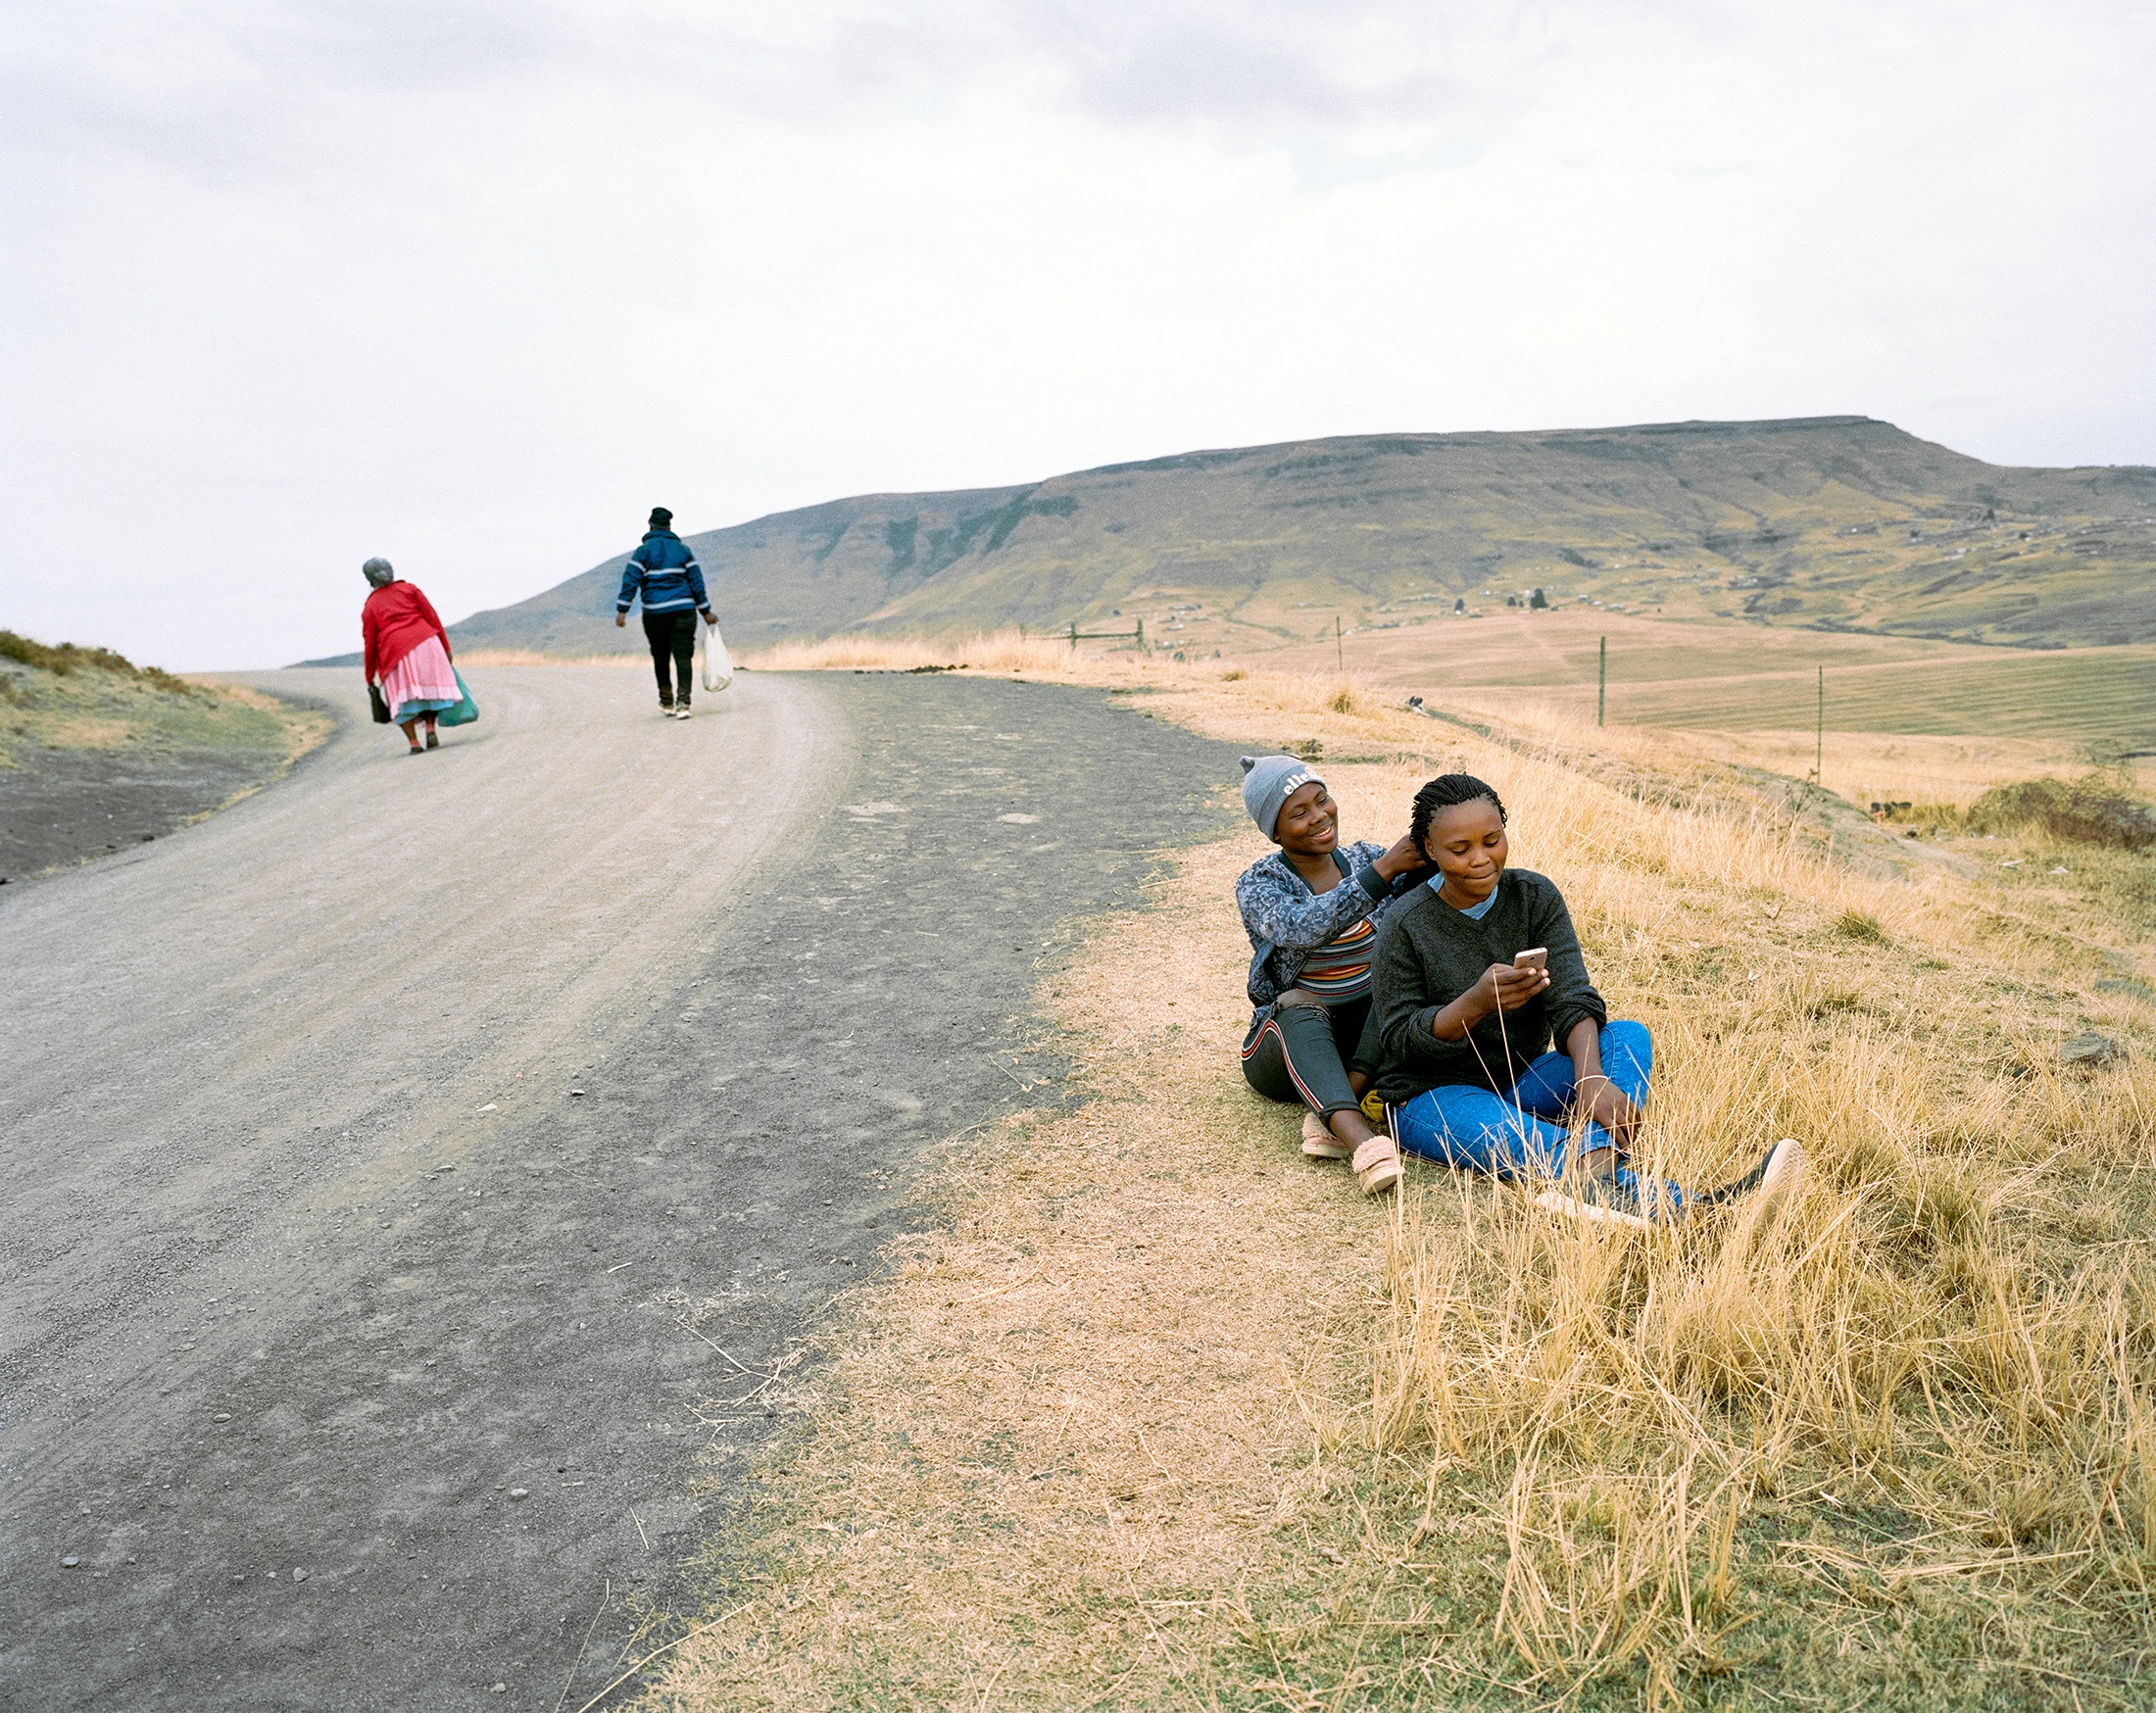 Lindokuhle Sobekwa's photograph 'Estopin Qumbu' shows two individuals walking on a dirt road on the left, and two individuals sitting on the grassy roadside on the right.
